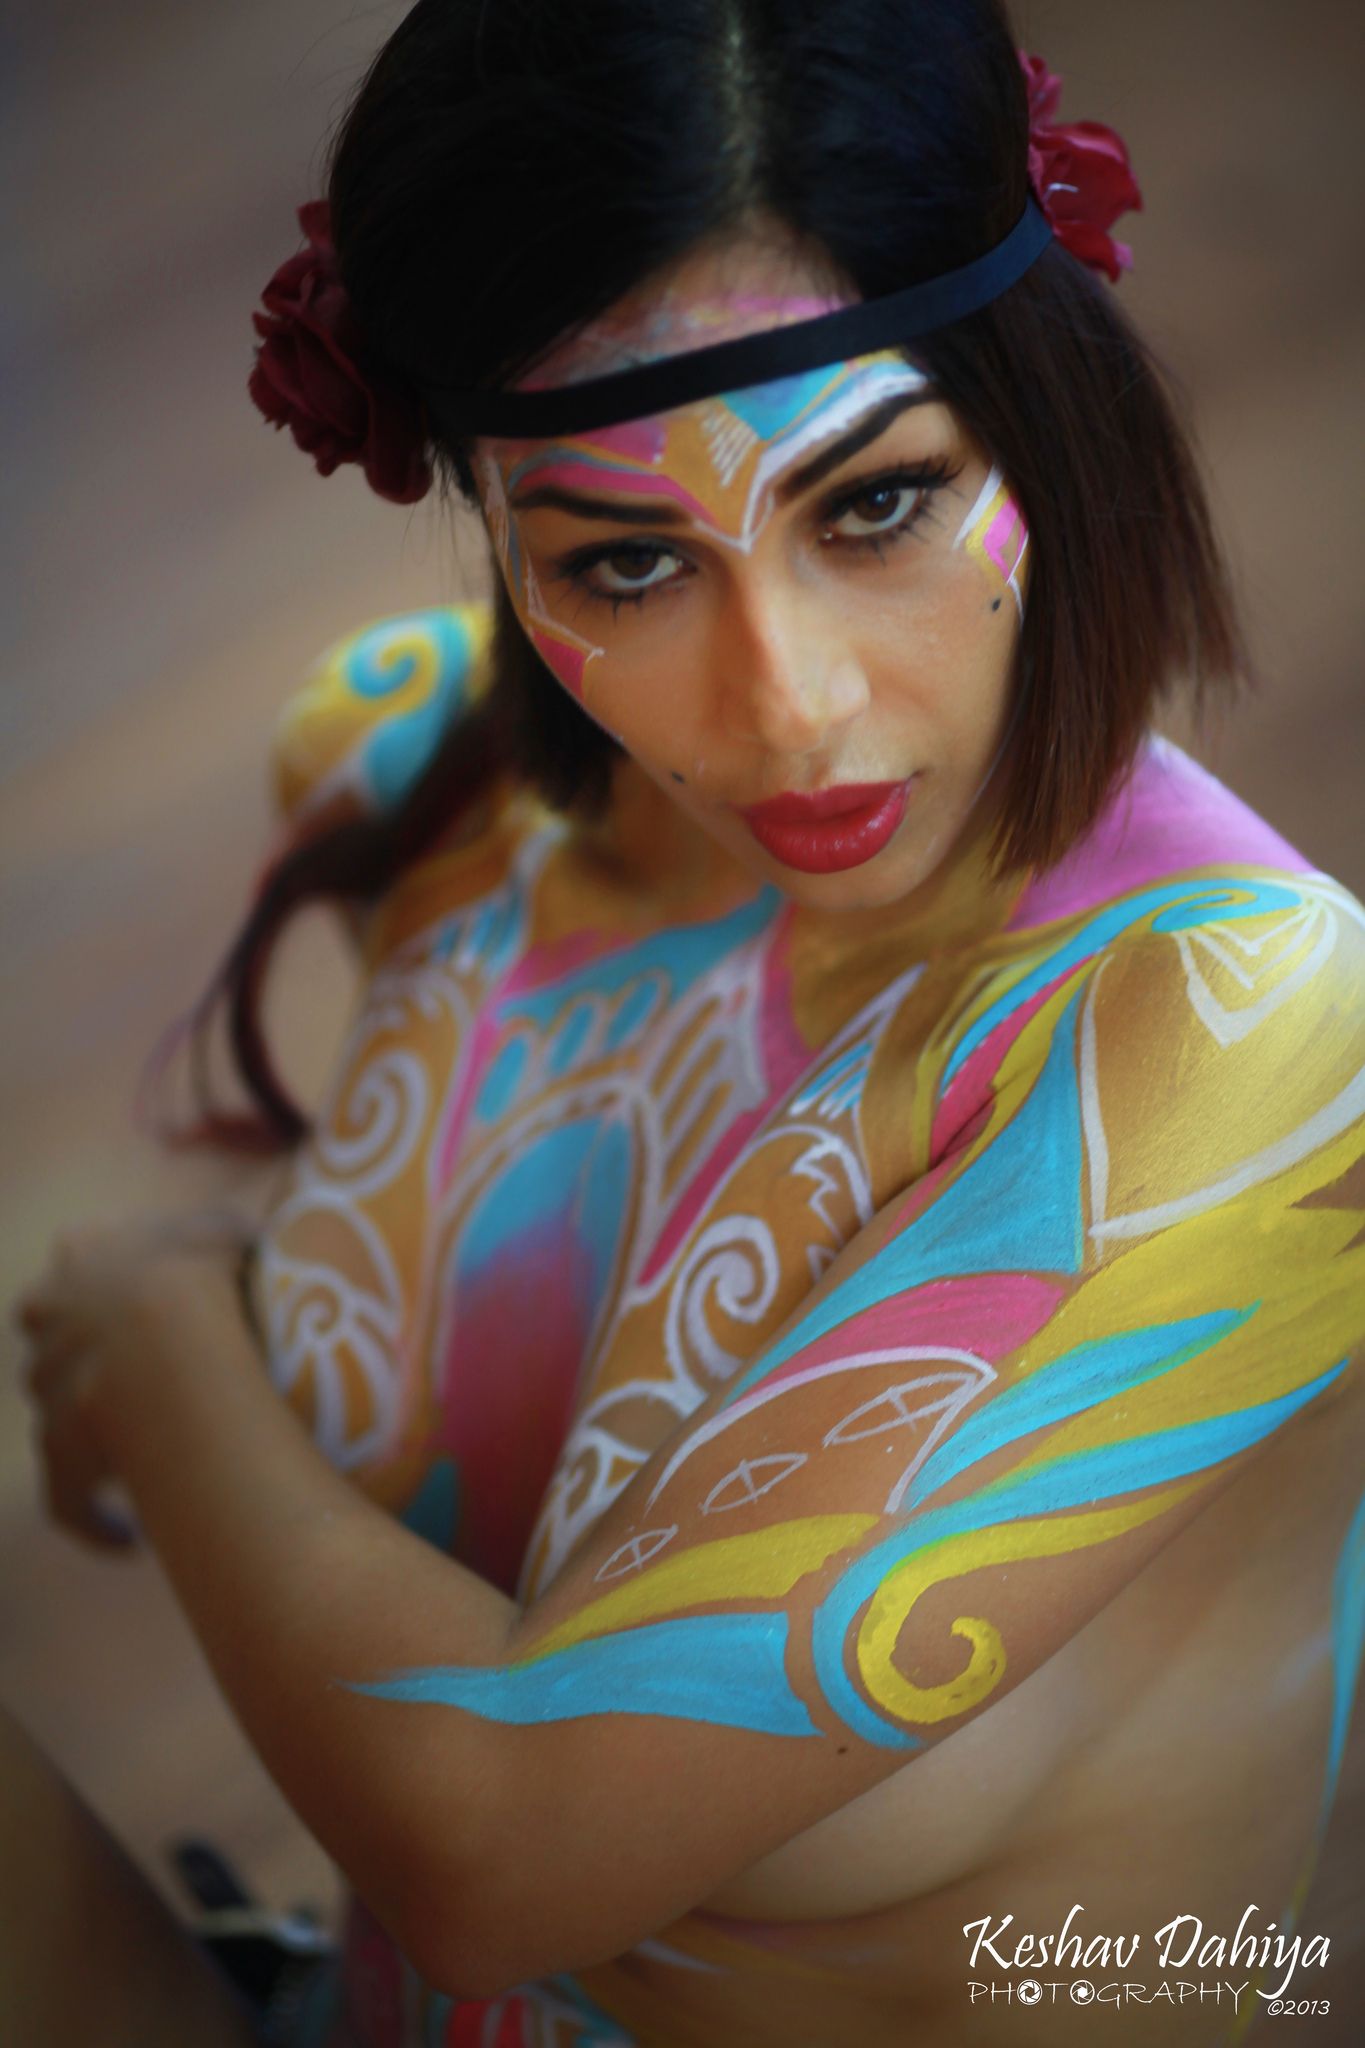 chris brubacher recommends Girl Body Painting Image